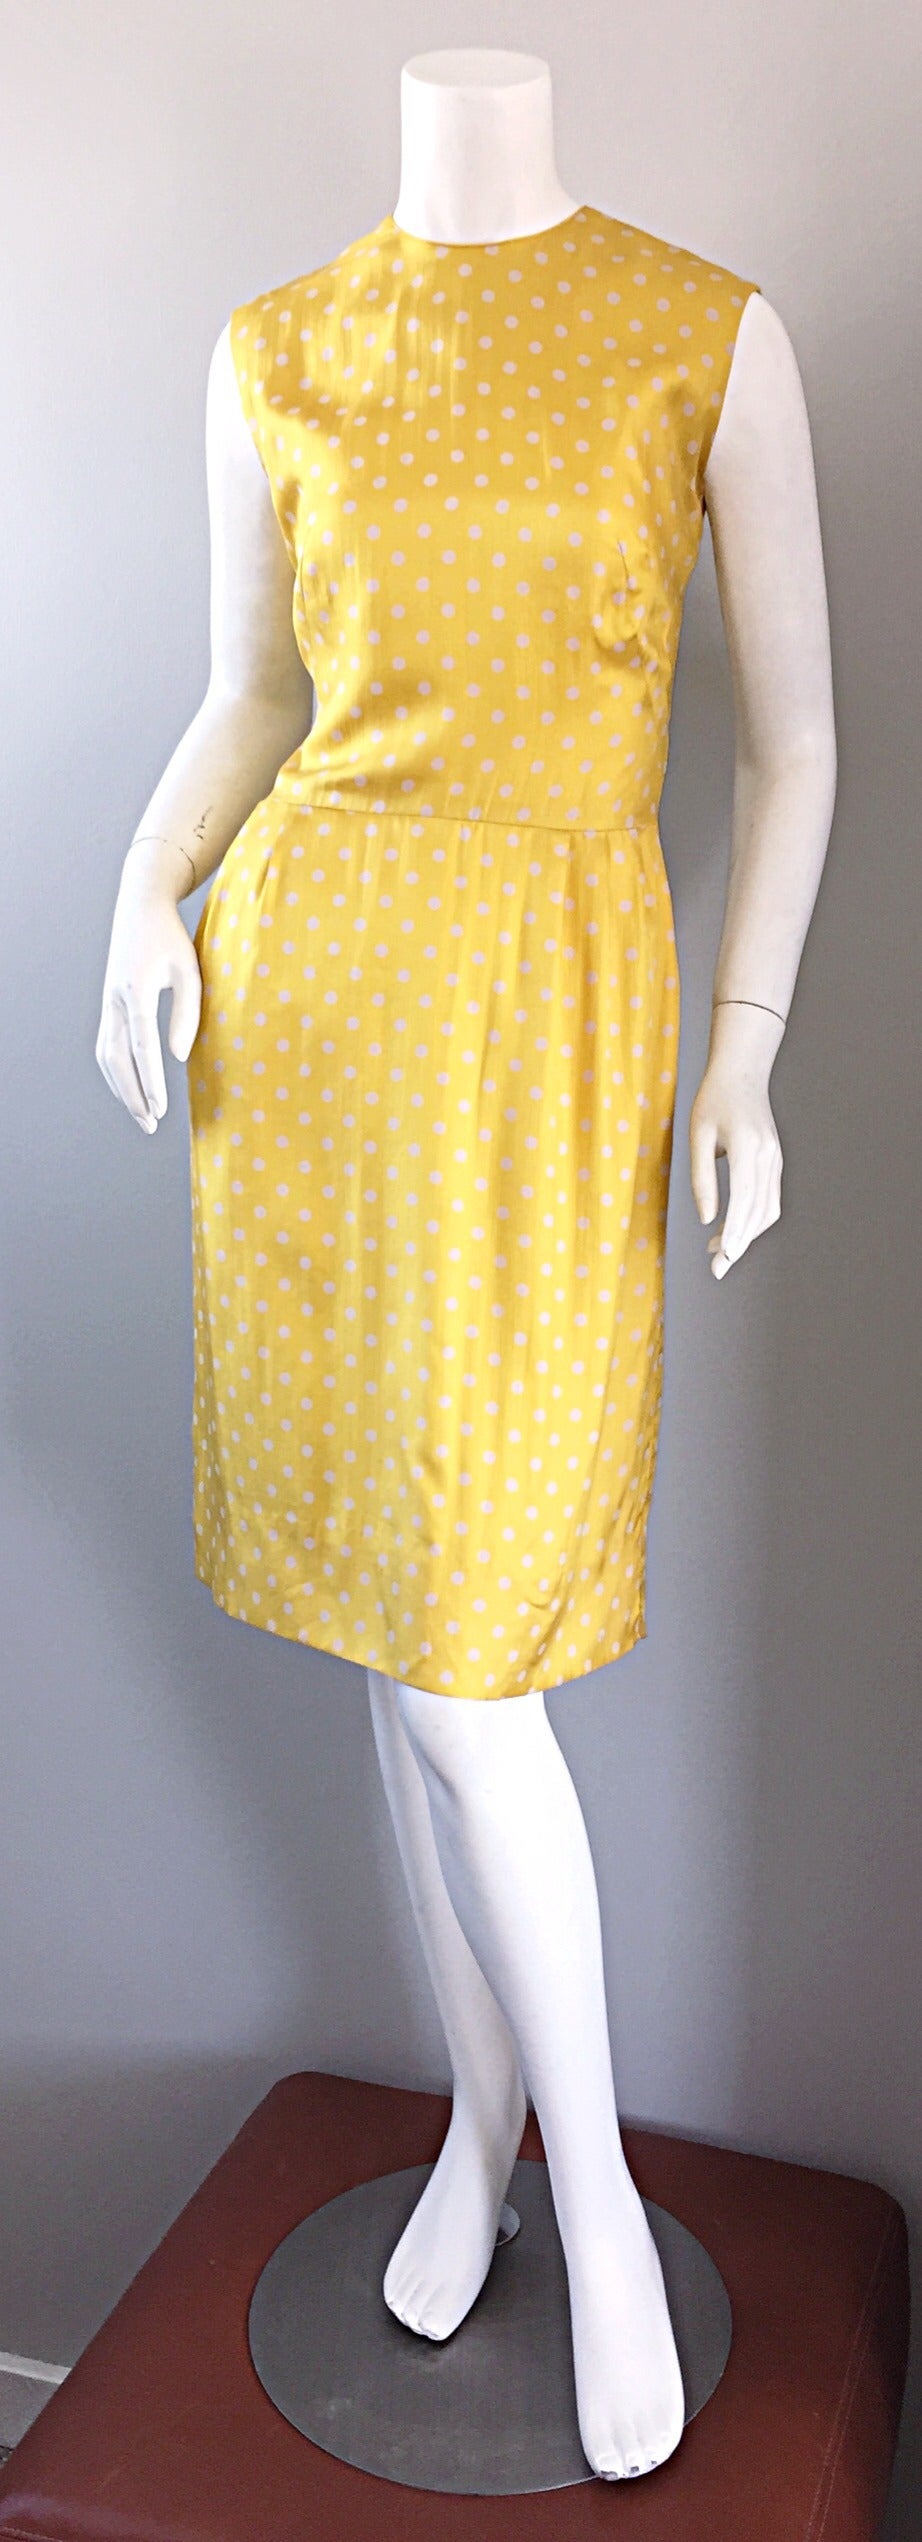 Amazing late 1950s/very early 1960s Addie Masters silk dress! Vibrant yellow color, with white polka dots throughout. Addie Masters was a very important Californian designer in the 1940s-1950s. Her designs are rare to come by, and are known for